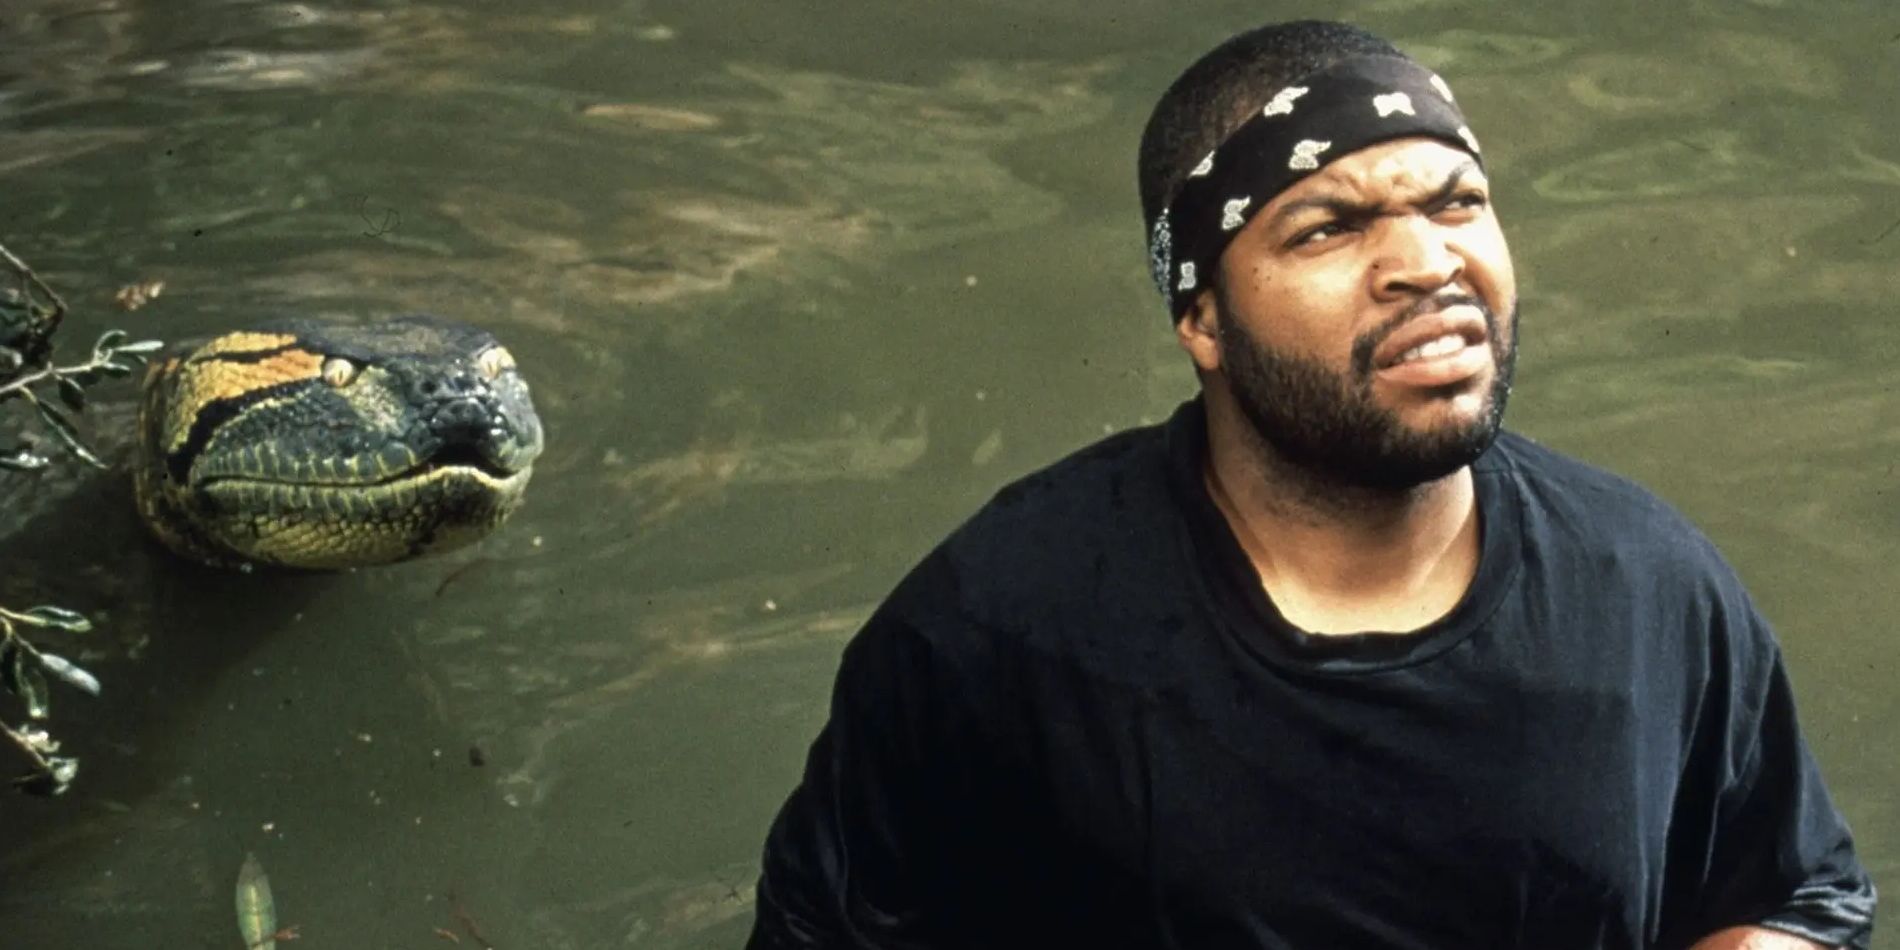 An anaconda sneaking up behind Ice Cube.